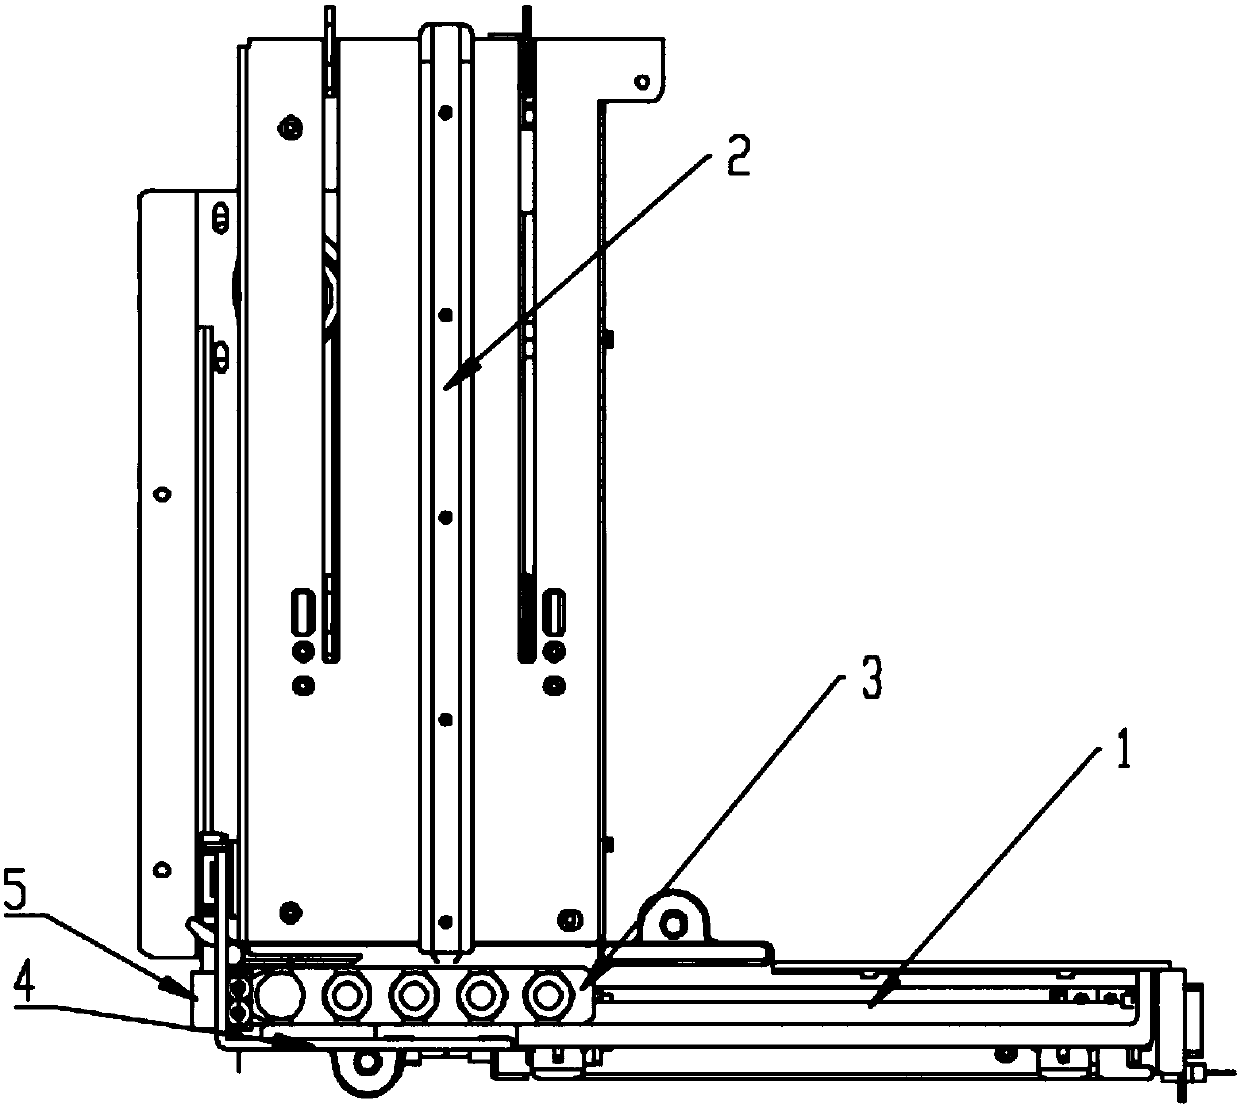 Sample frame positioning apparatus for full automatic luminescence measurement instrument